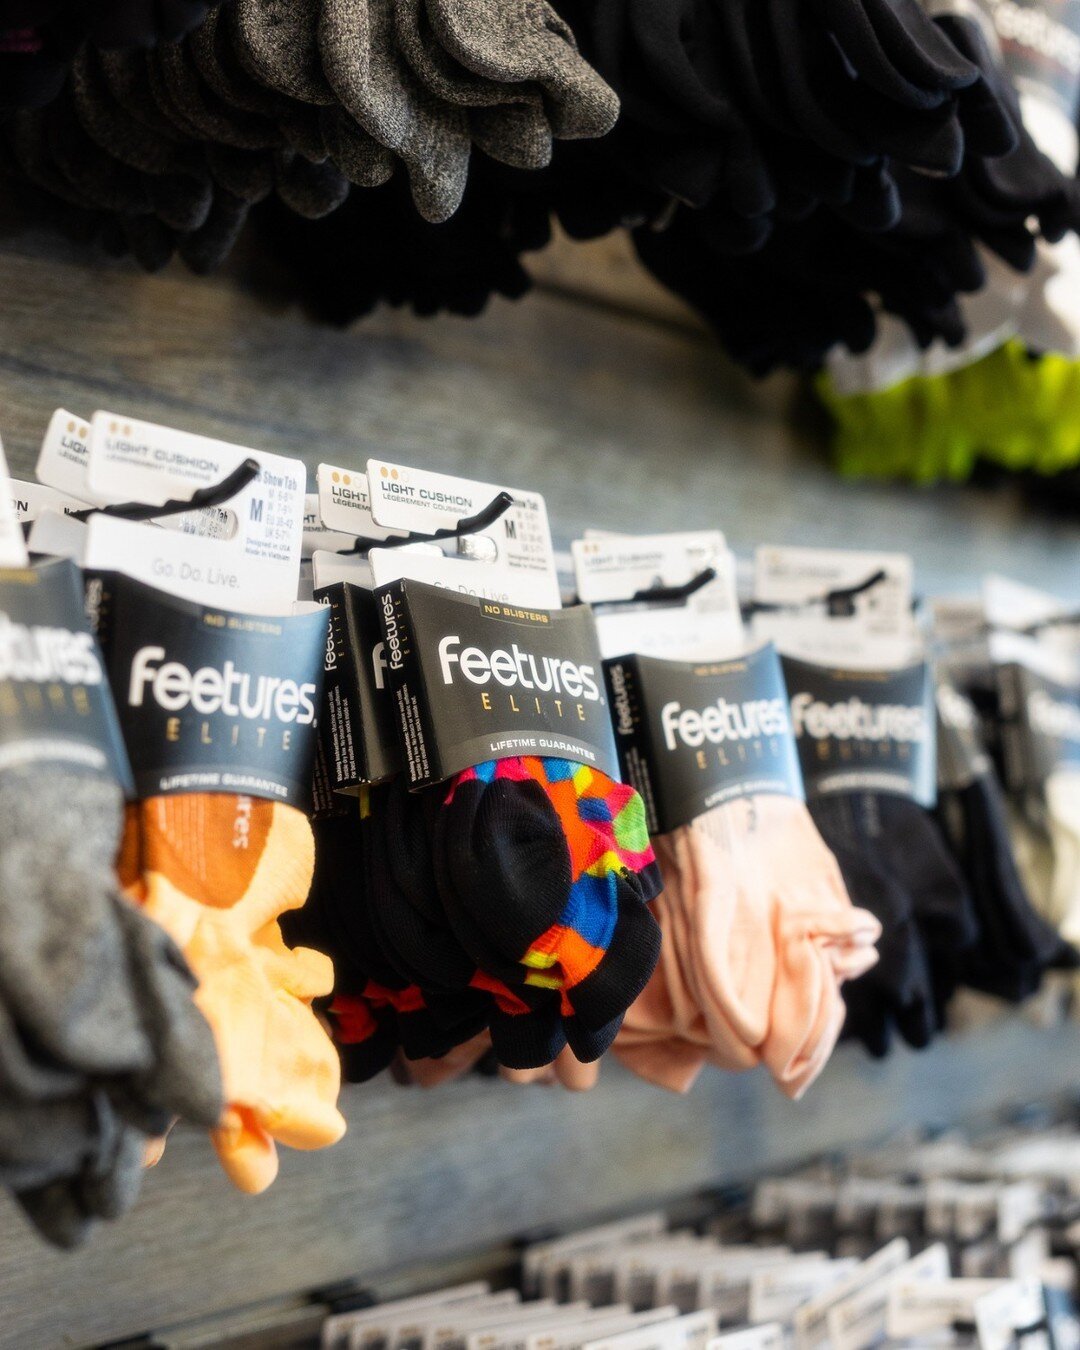 Feetures creates high quality performance socks for every kind of athlete. We love their commitment to sustainability and innovation. Stop by the store to pick up a pair.